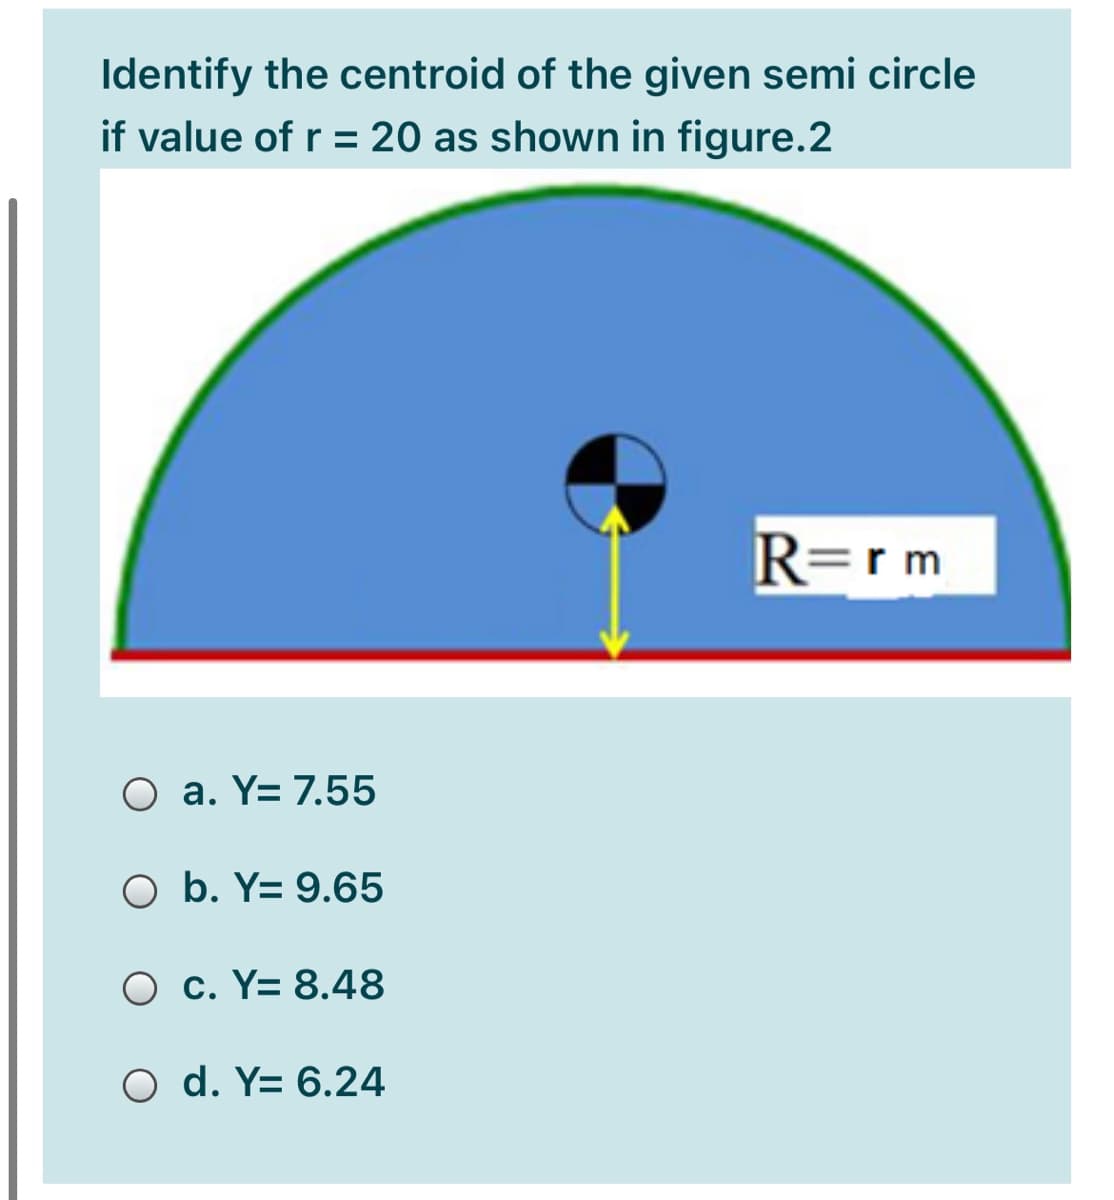 Identify the centroid of the given semi circle
if value of r = 20 as shown in figure.2
R=rm
O a. Y= 7.55
O b. Y= 9.65
O c. Y= 8.48
O d. Y= 6.24
